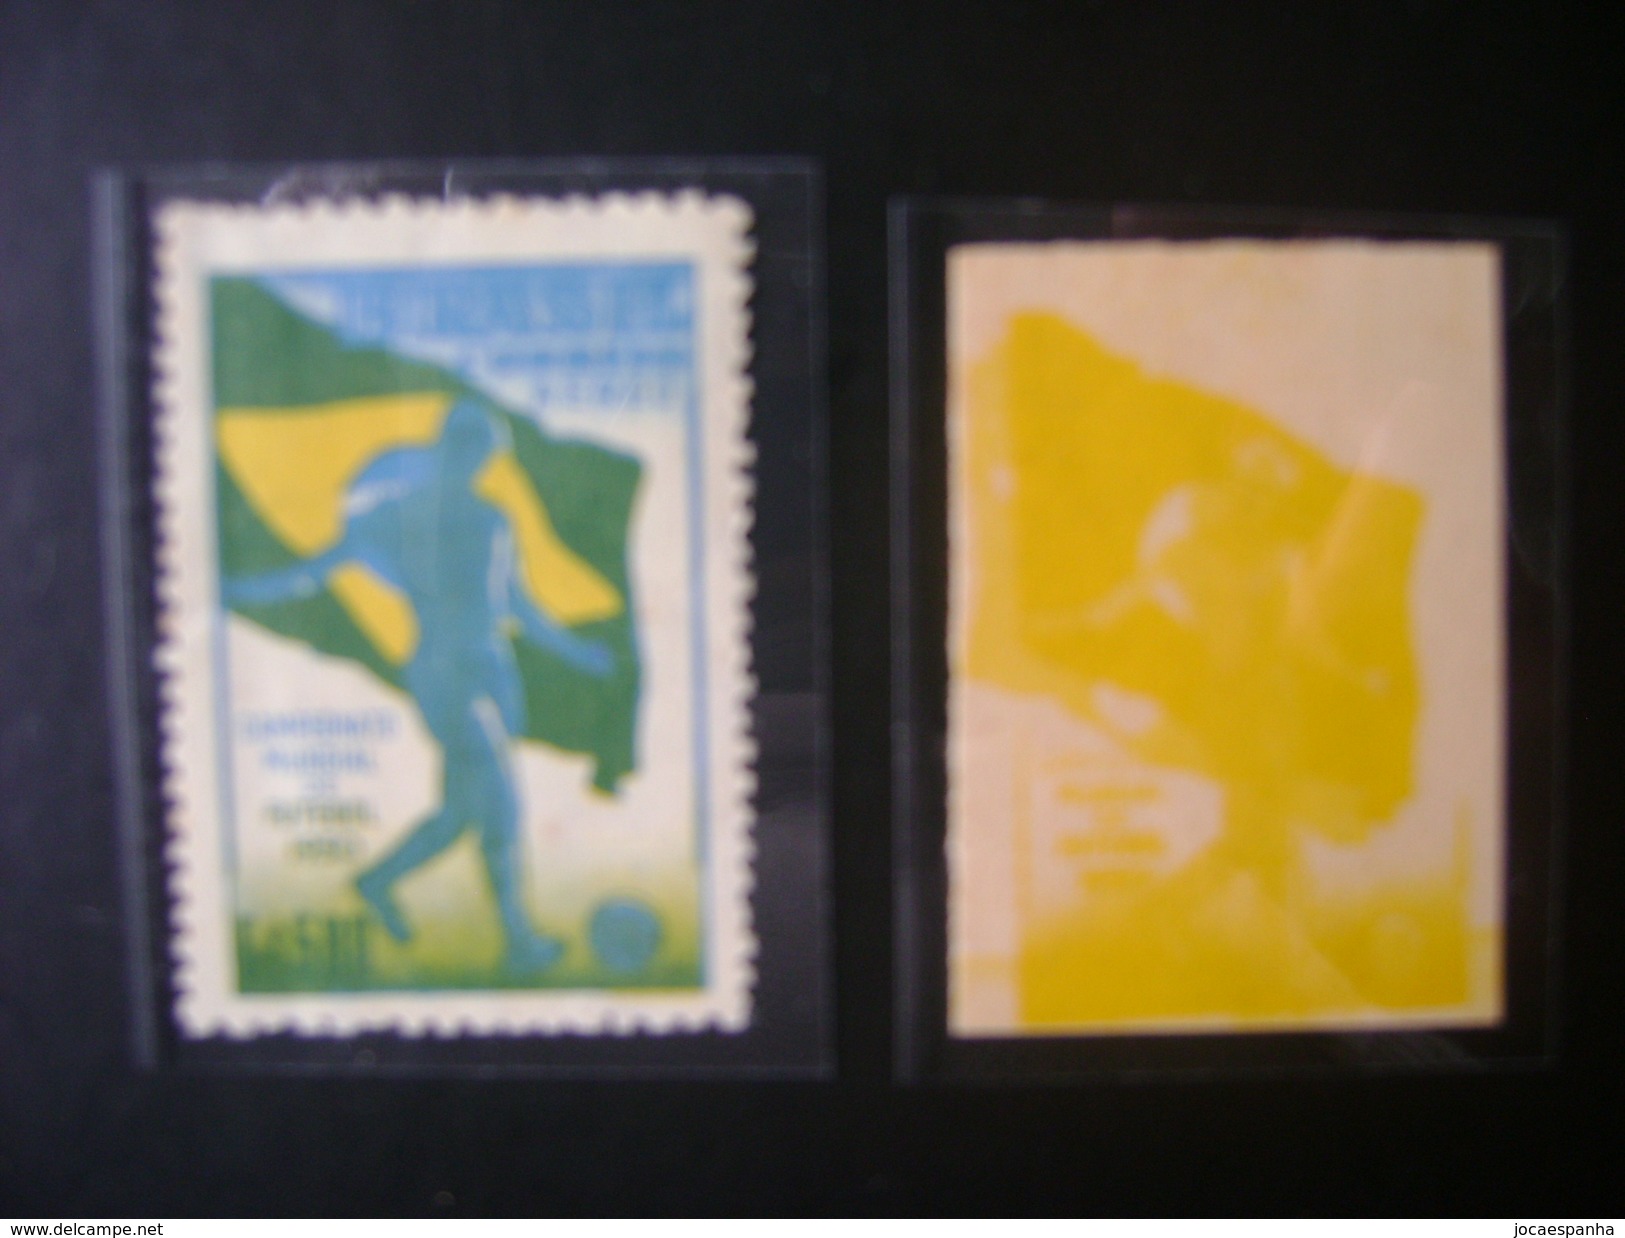 WORLD CUP OF FOOTBALL IN BRAZIL 1950 - A-76, PROOF YELLOW COLOR WITH DISPLACEMENT IN THE STATE - 1950 – Brésil